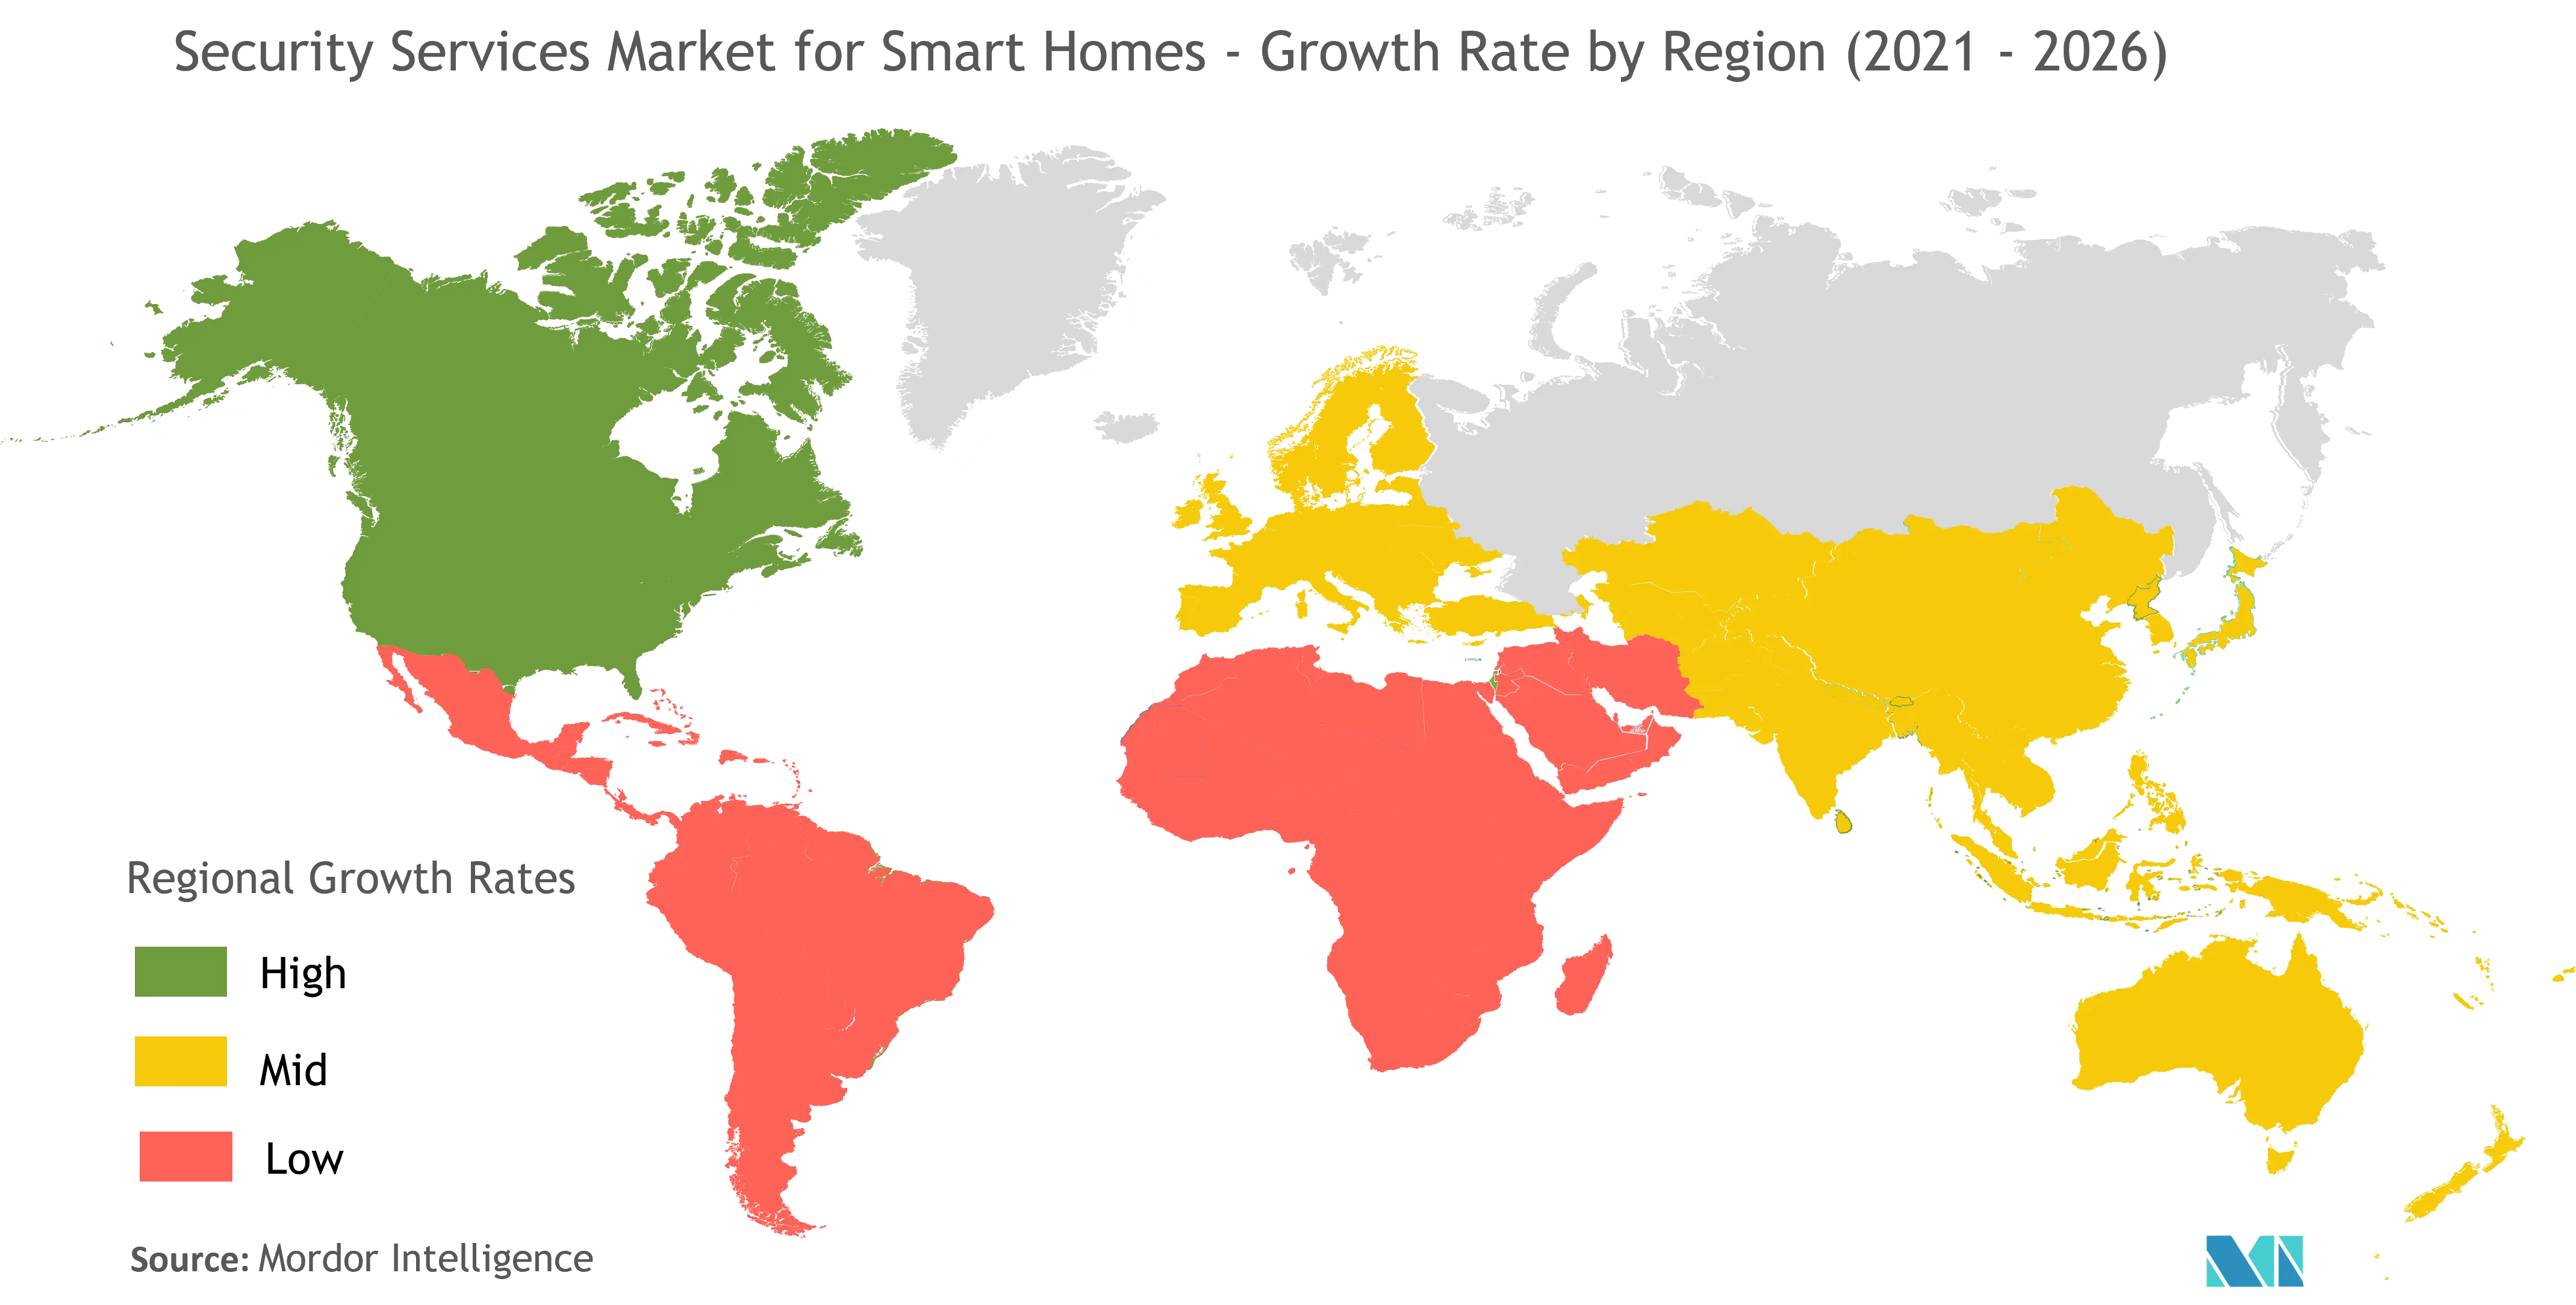 Security Services Market for Smart Homes